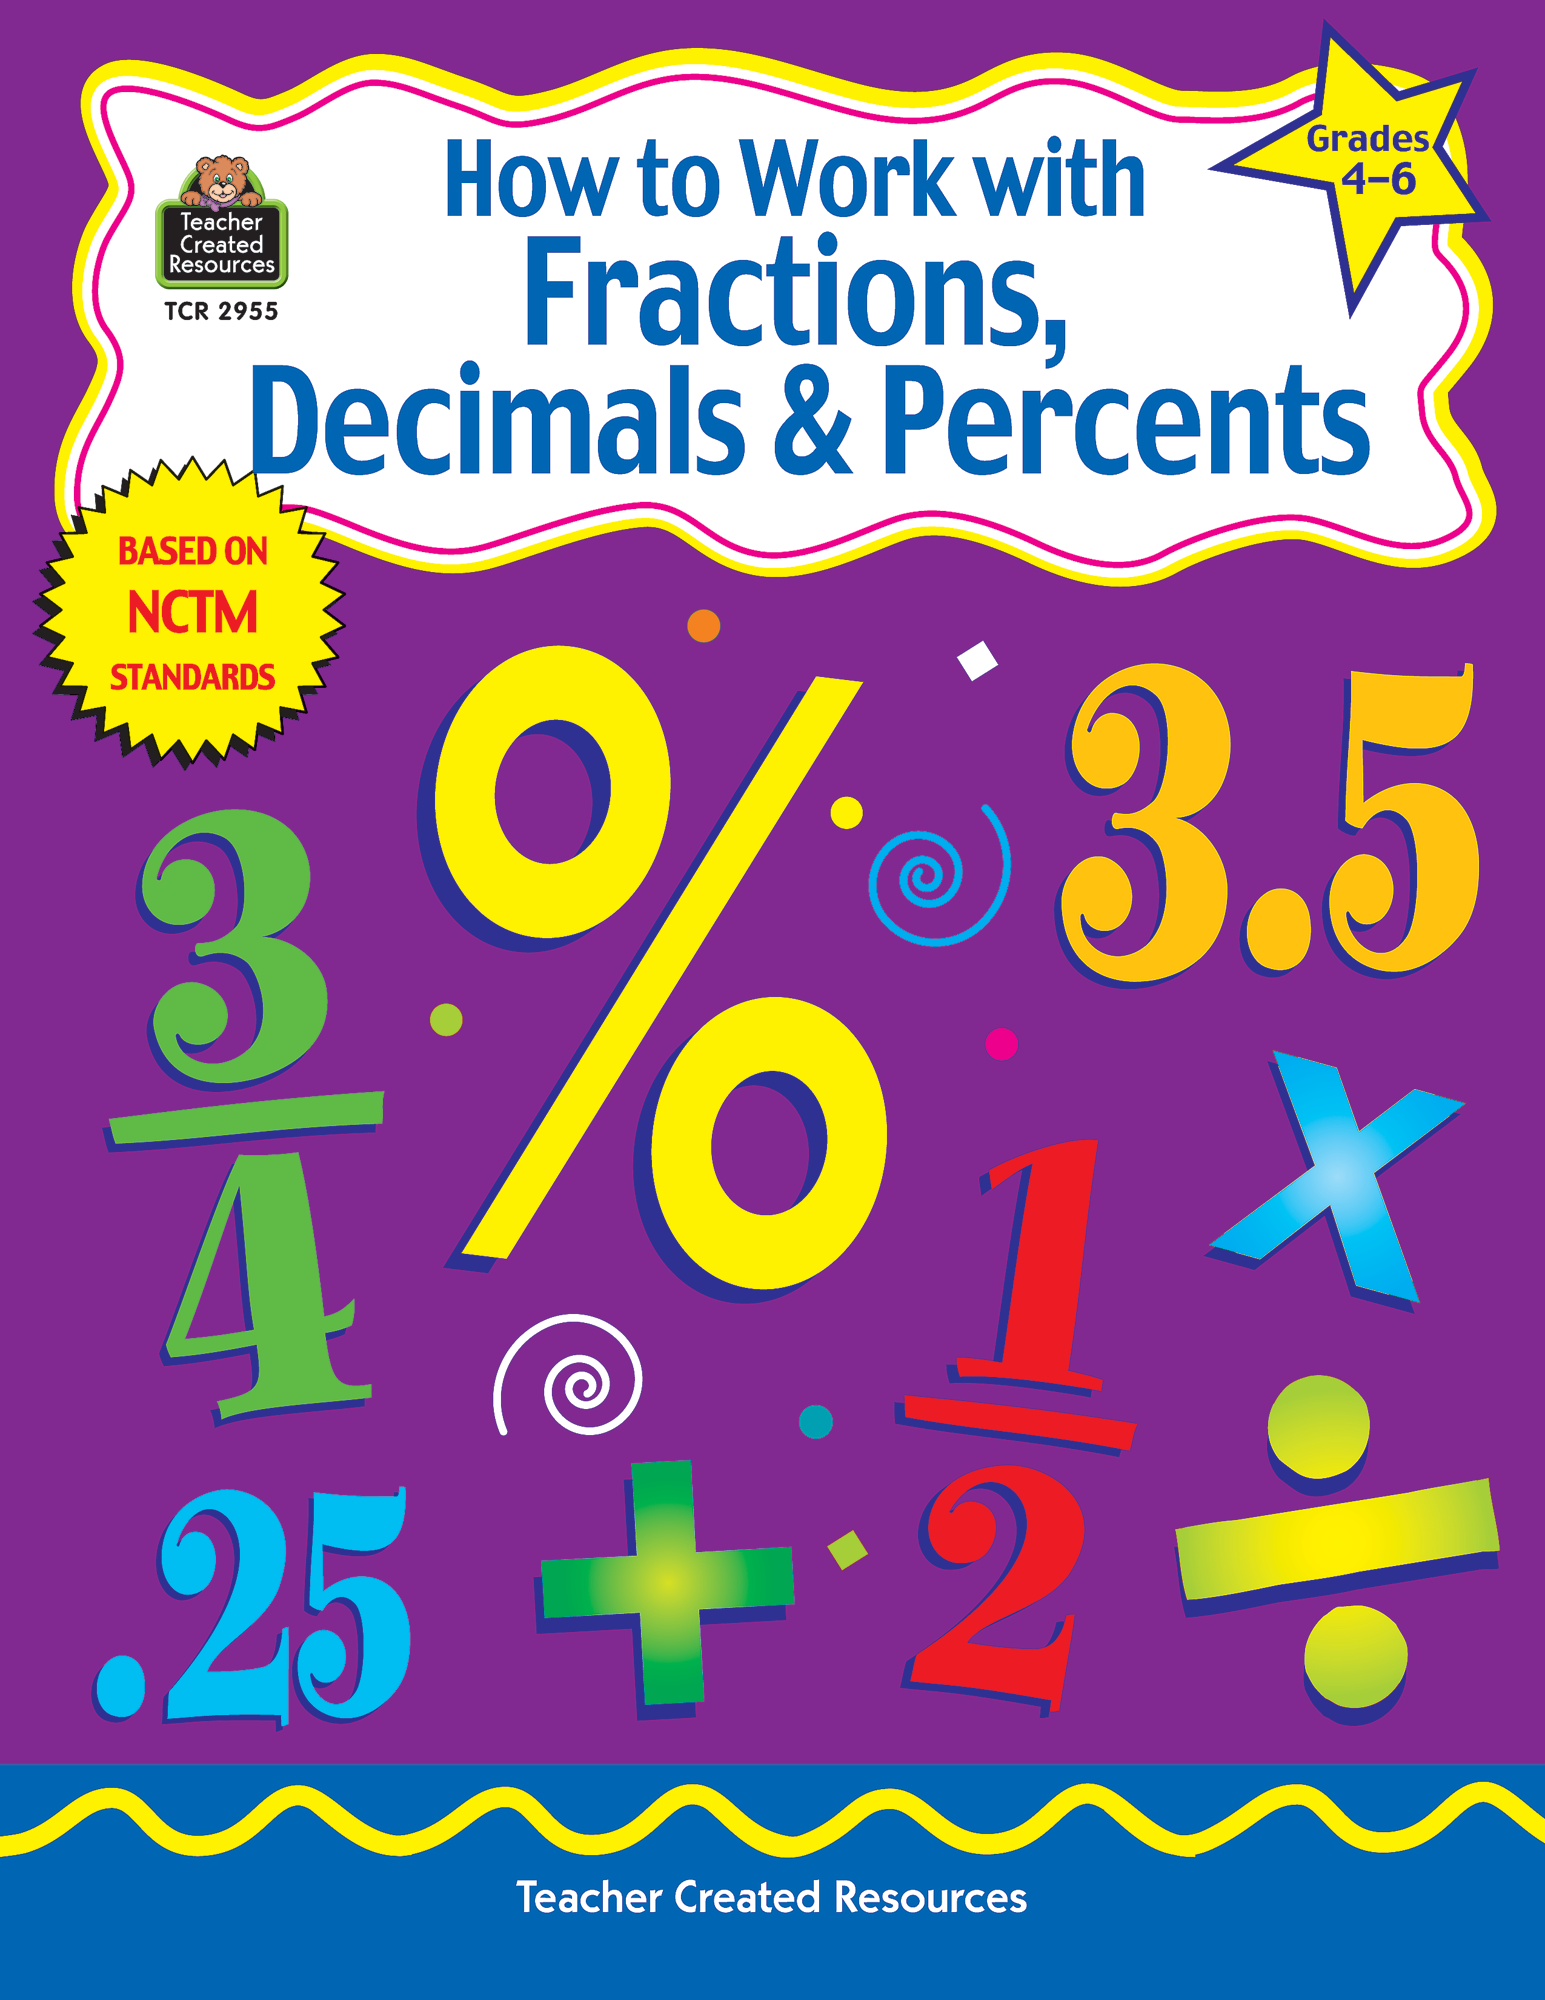 How to Work with Fractions, Decimals & Percents (Gr. 4â€“6)